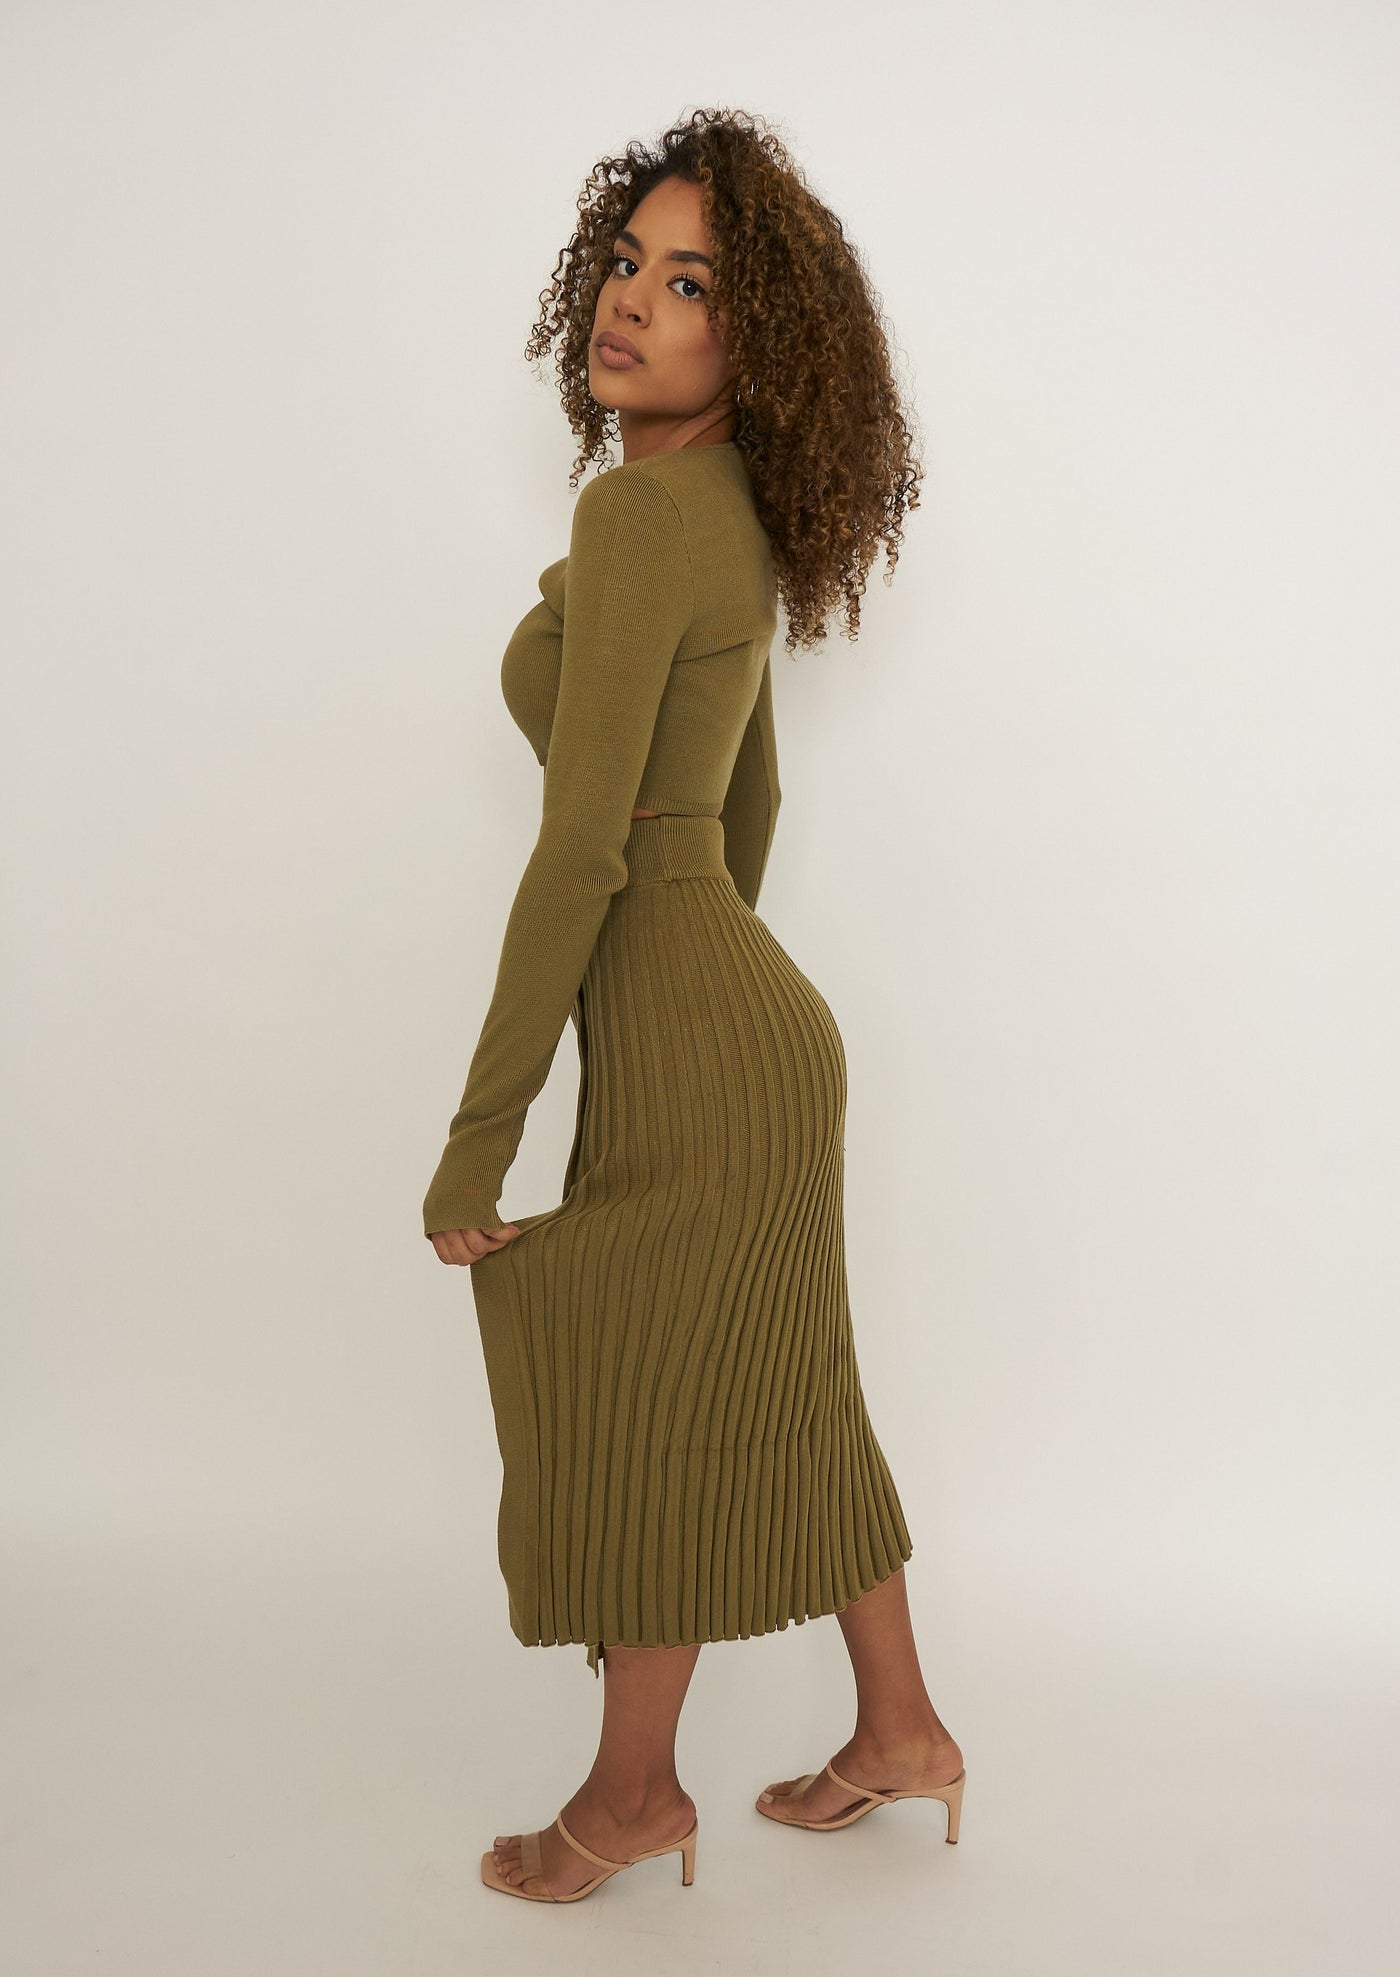 Show Me Leg is an olive green sultry pleated, mid-thigh slit sweater skirt paired with a long sleeve crop top. The crop top has a thumb hole feature that allows for easy layering and provides a sleek look. The skirt has a natural hourglass shape that helps accentuate your hips, slims your waist creating the hourglass effect when put on.